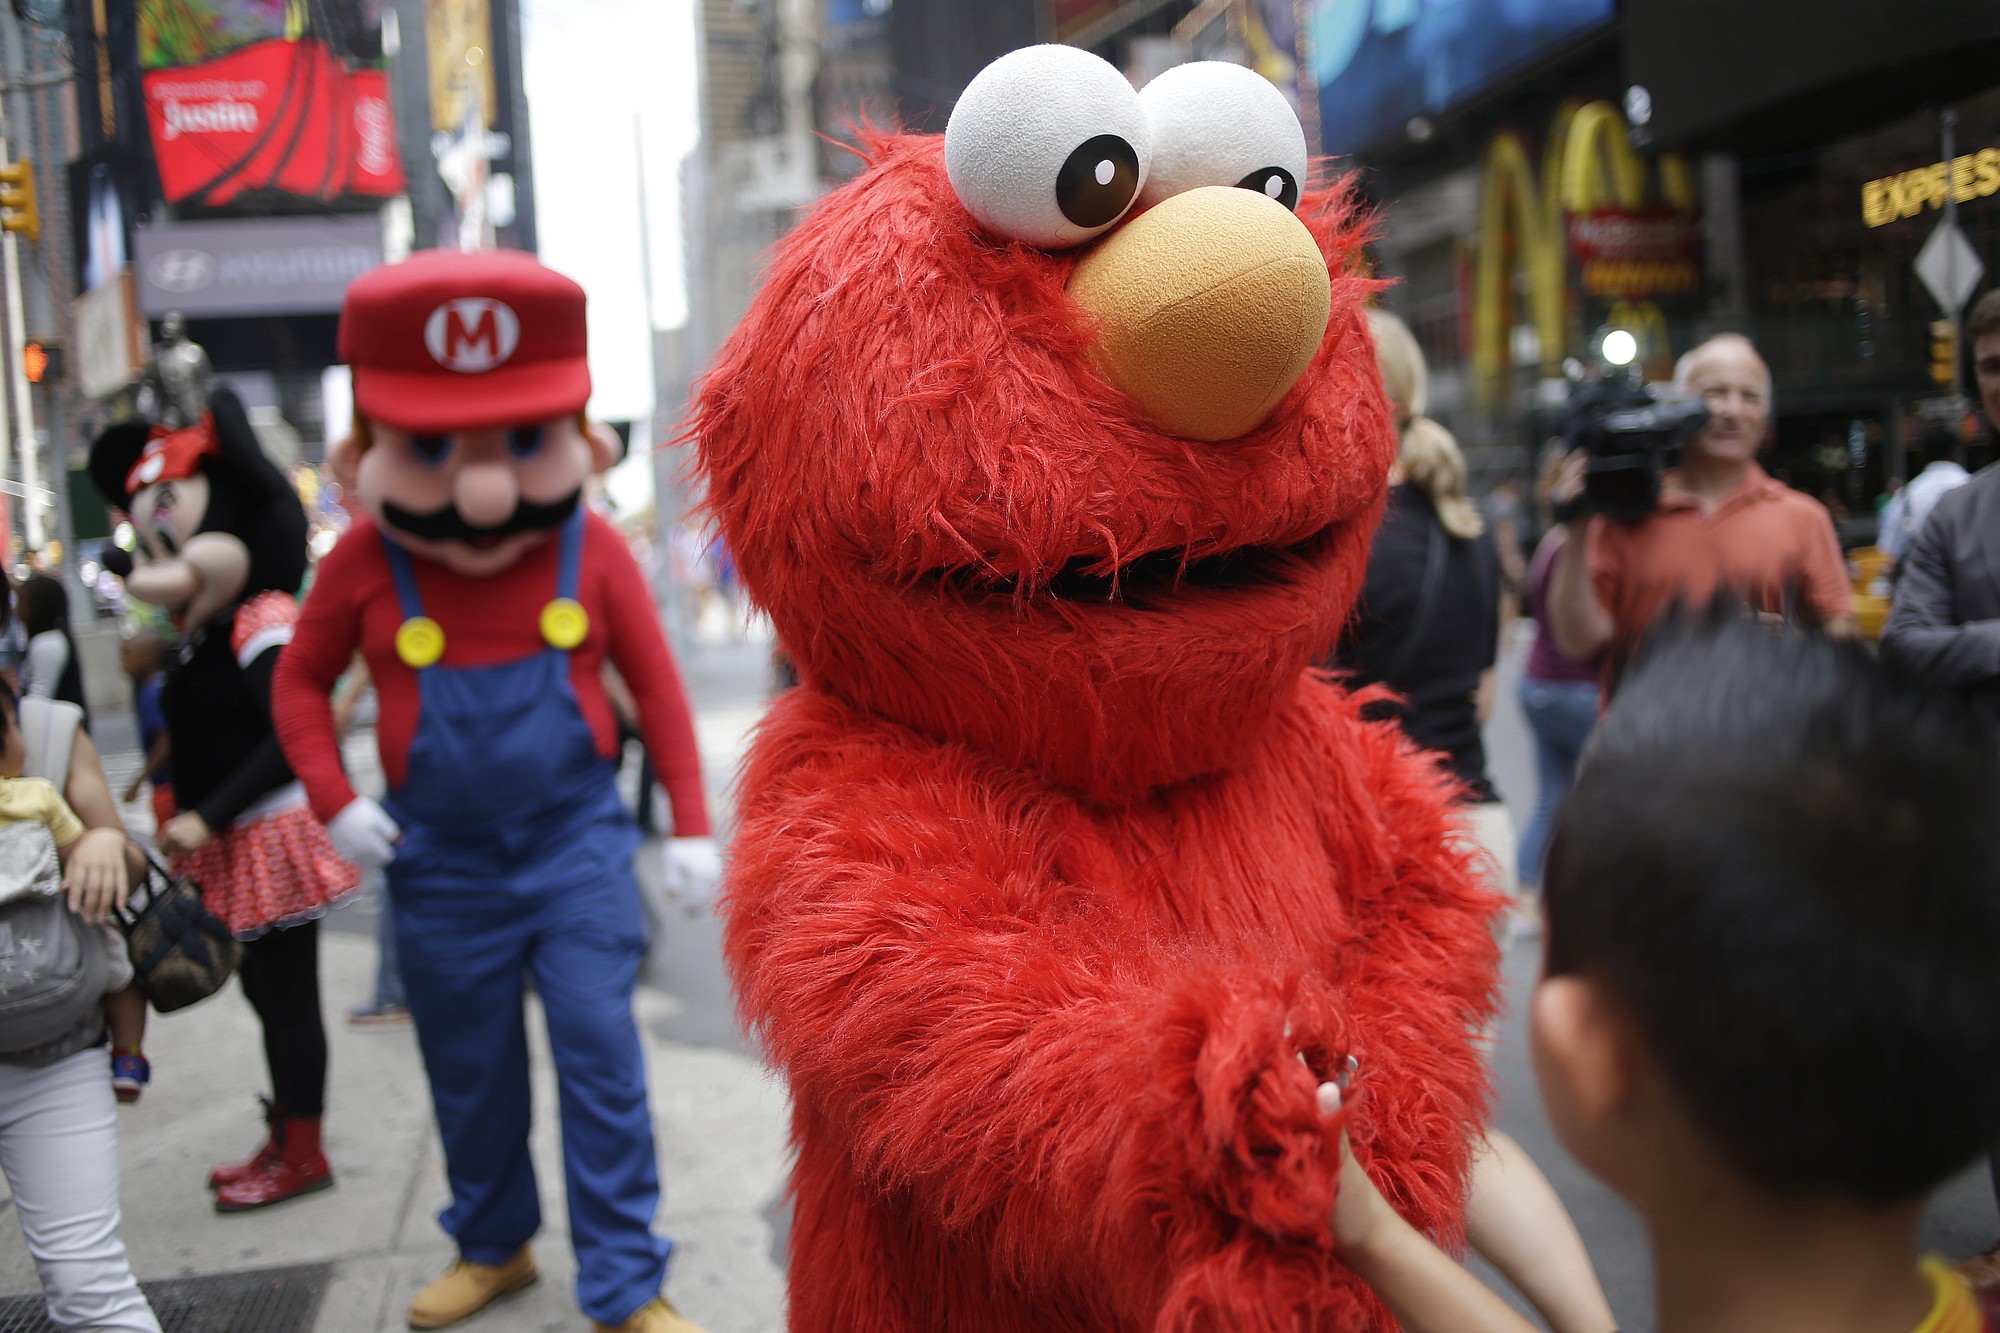 A person dressed as Elmo shakes hands with a pedestrian in Times Square on Monday in New York.